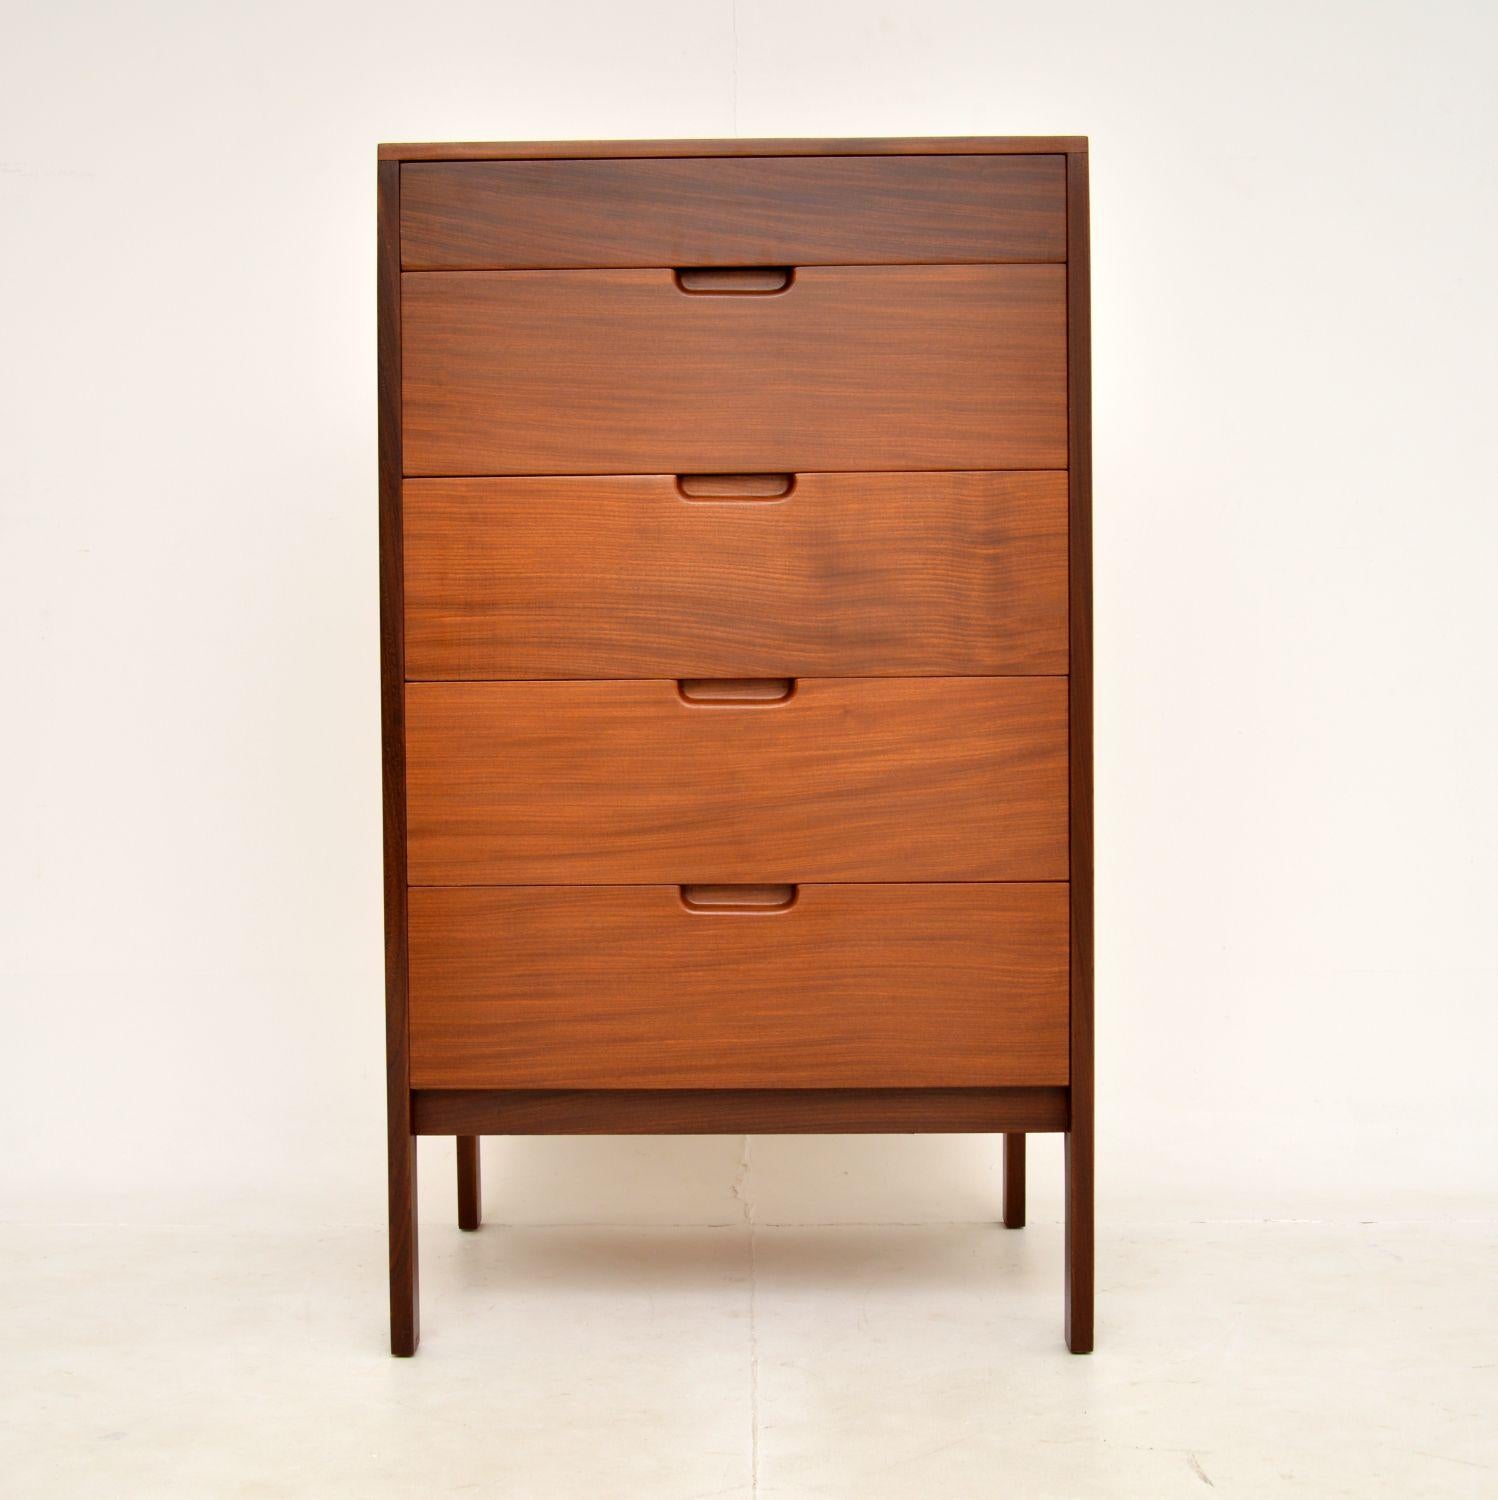 A stylish and extremely rare vintage chest of drawers. This was made in England, it was designed by Richard Hornby for Heals as part of the Fyne Ladye range.

The quality is exceptional and this is beautifully designed, with a sleek and minimal